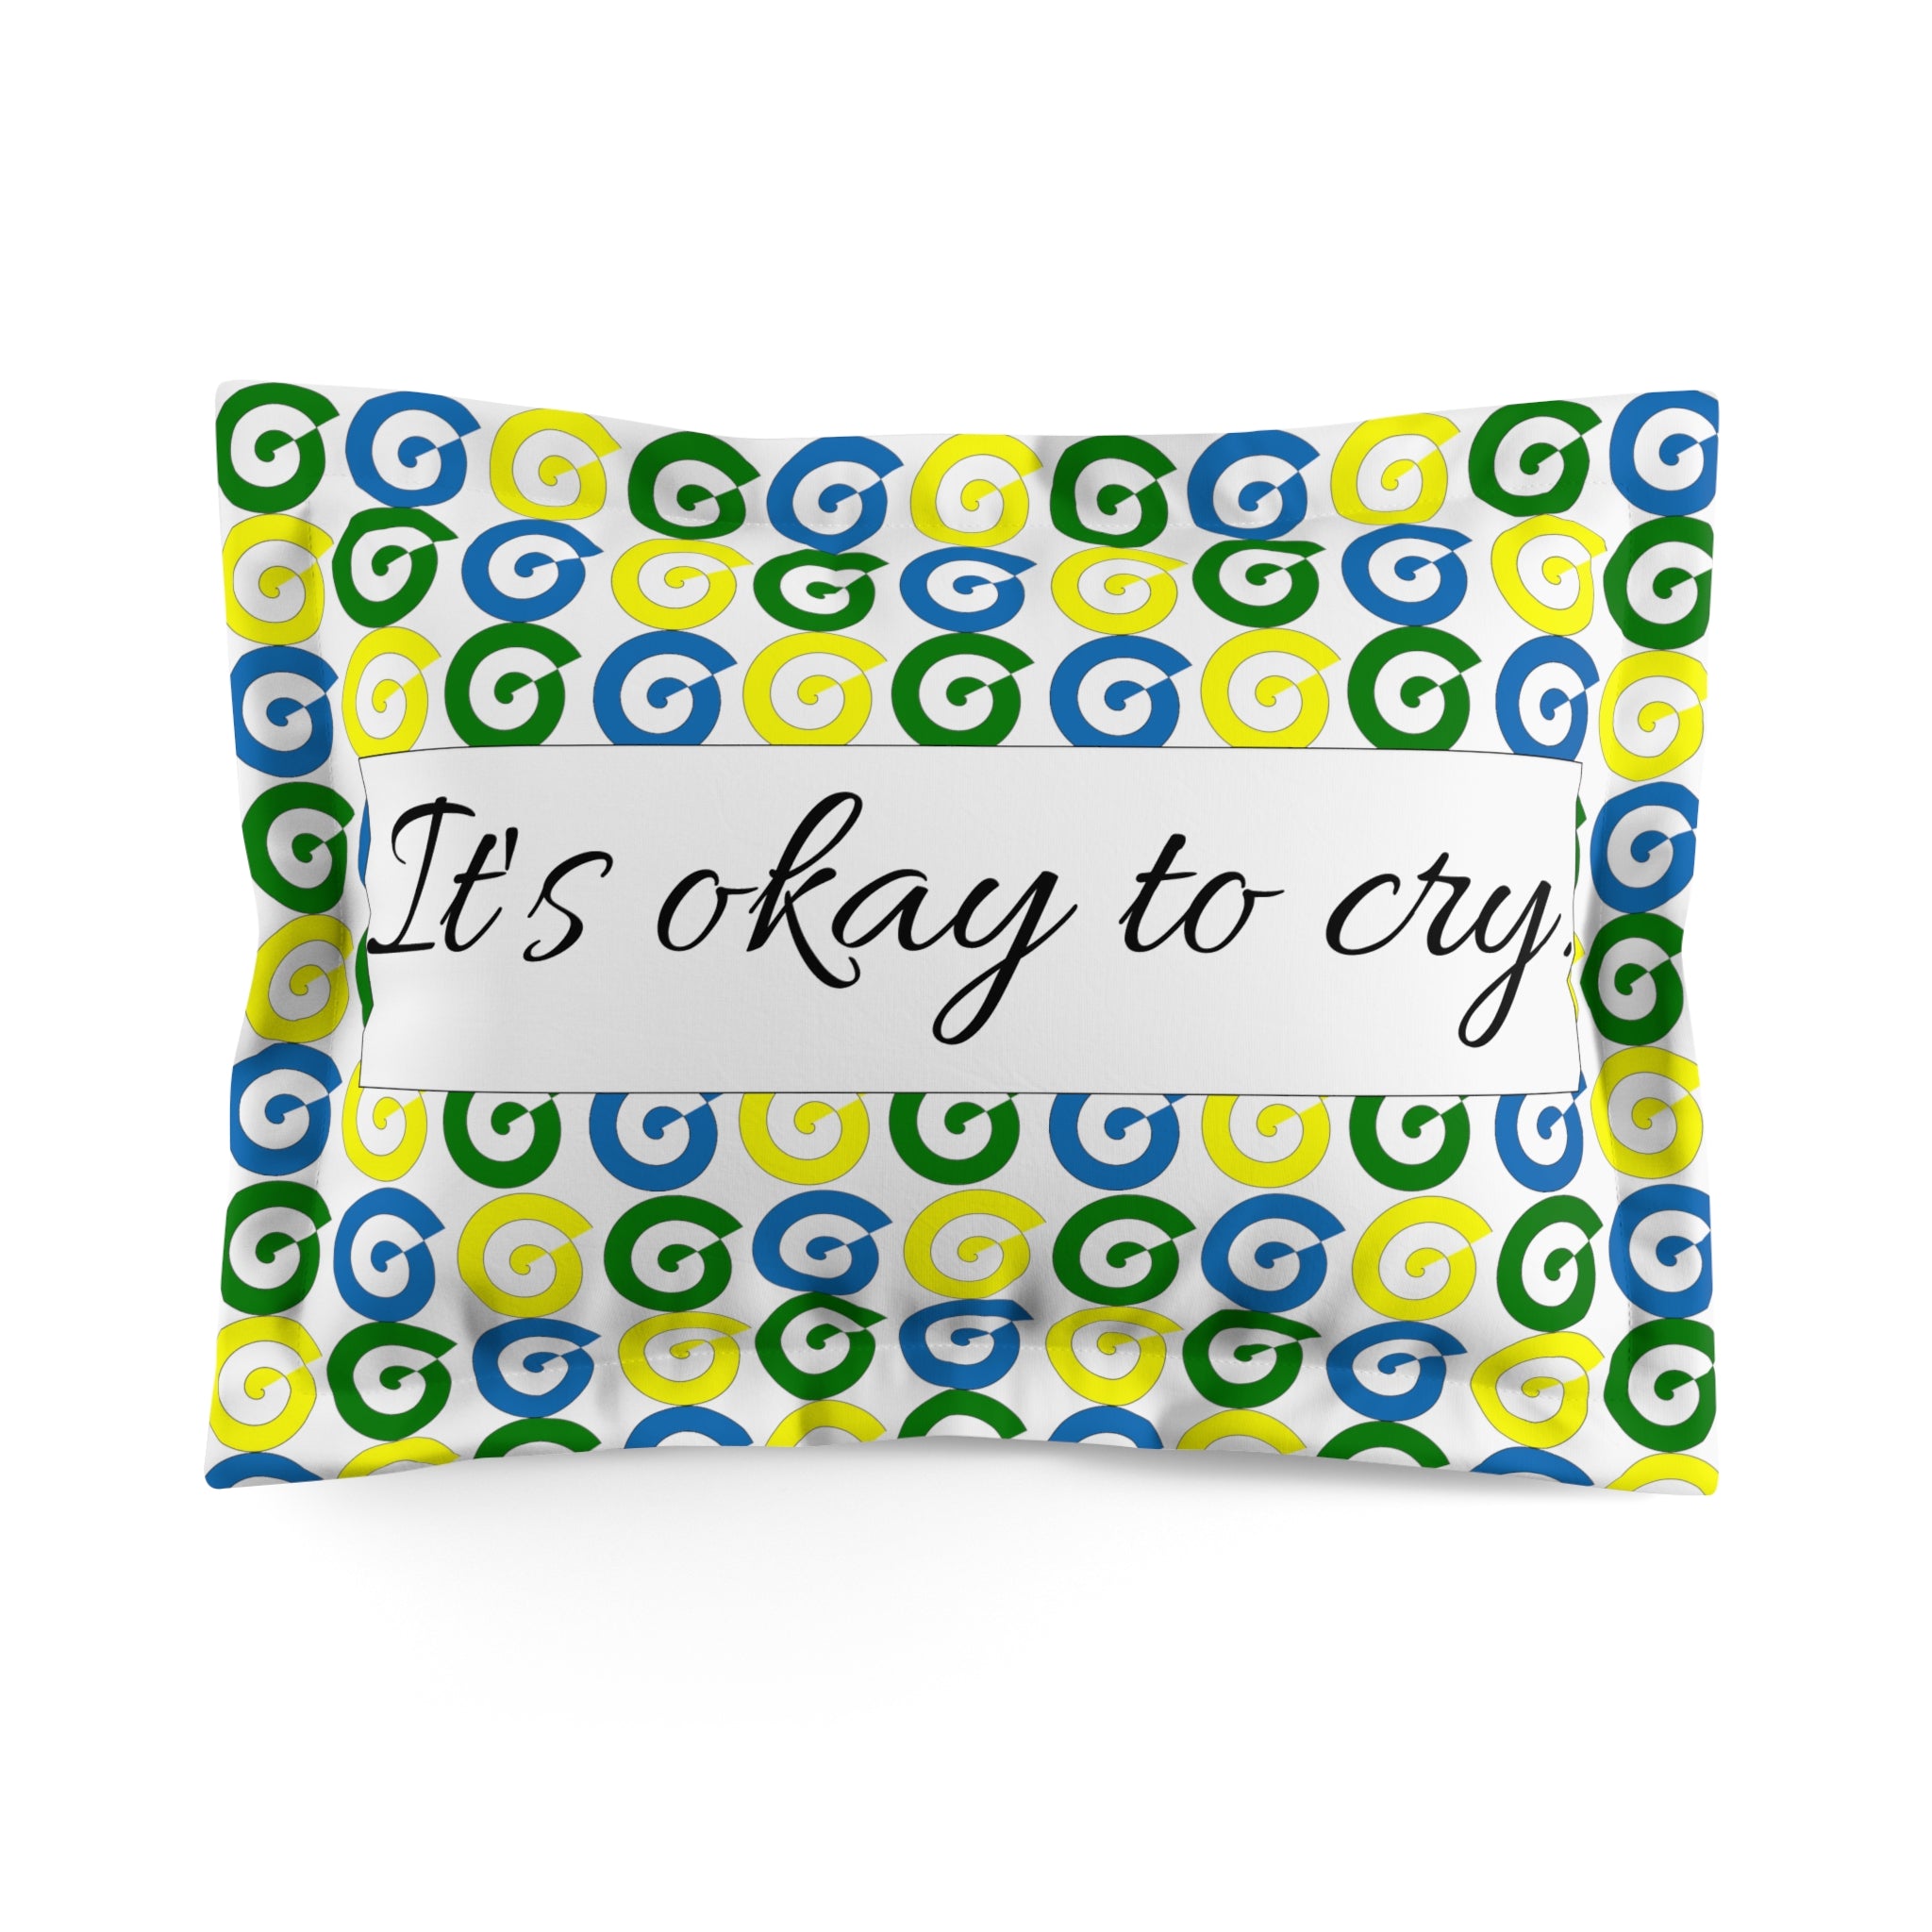 Microfiber pillow sham with caption 'it's okay to cry' and covered with spirals in St. Vincent and the Grenadines national colors.